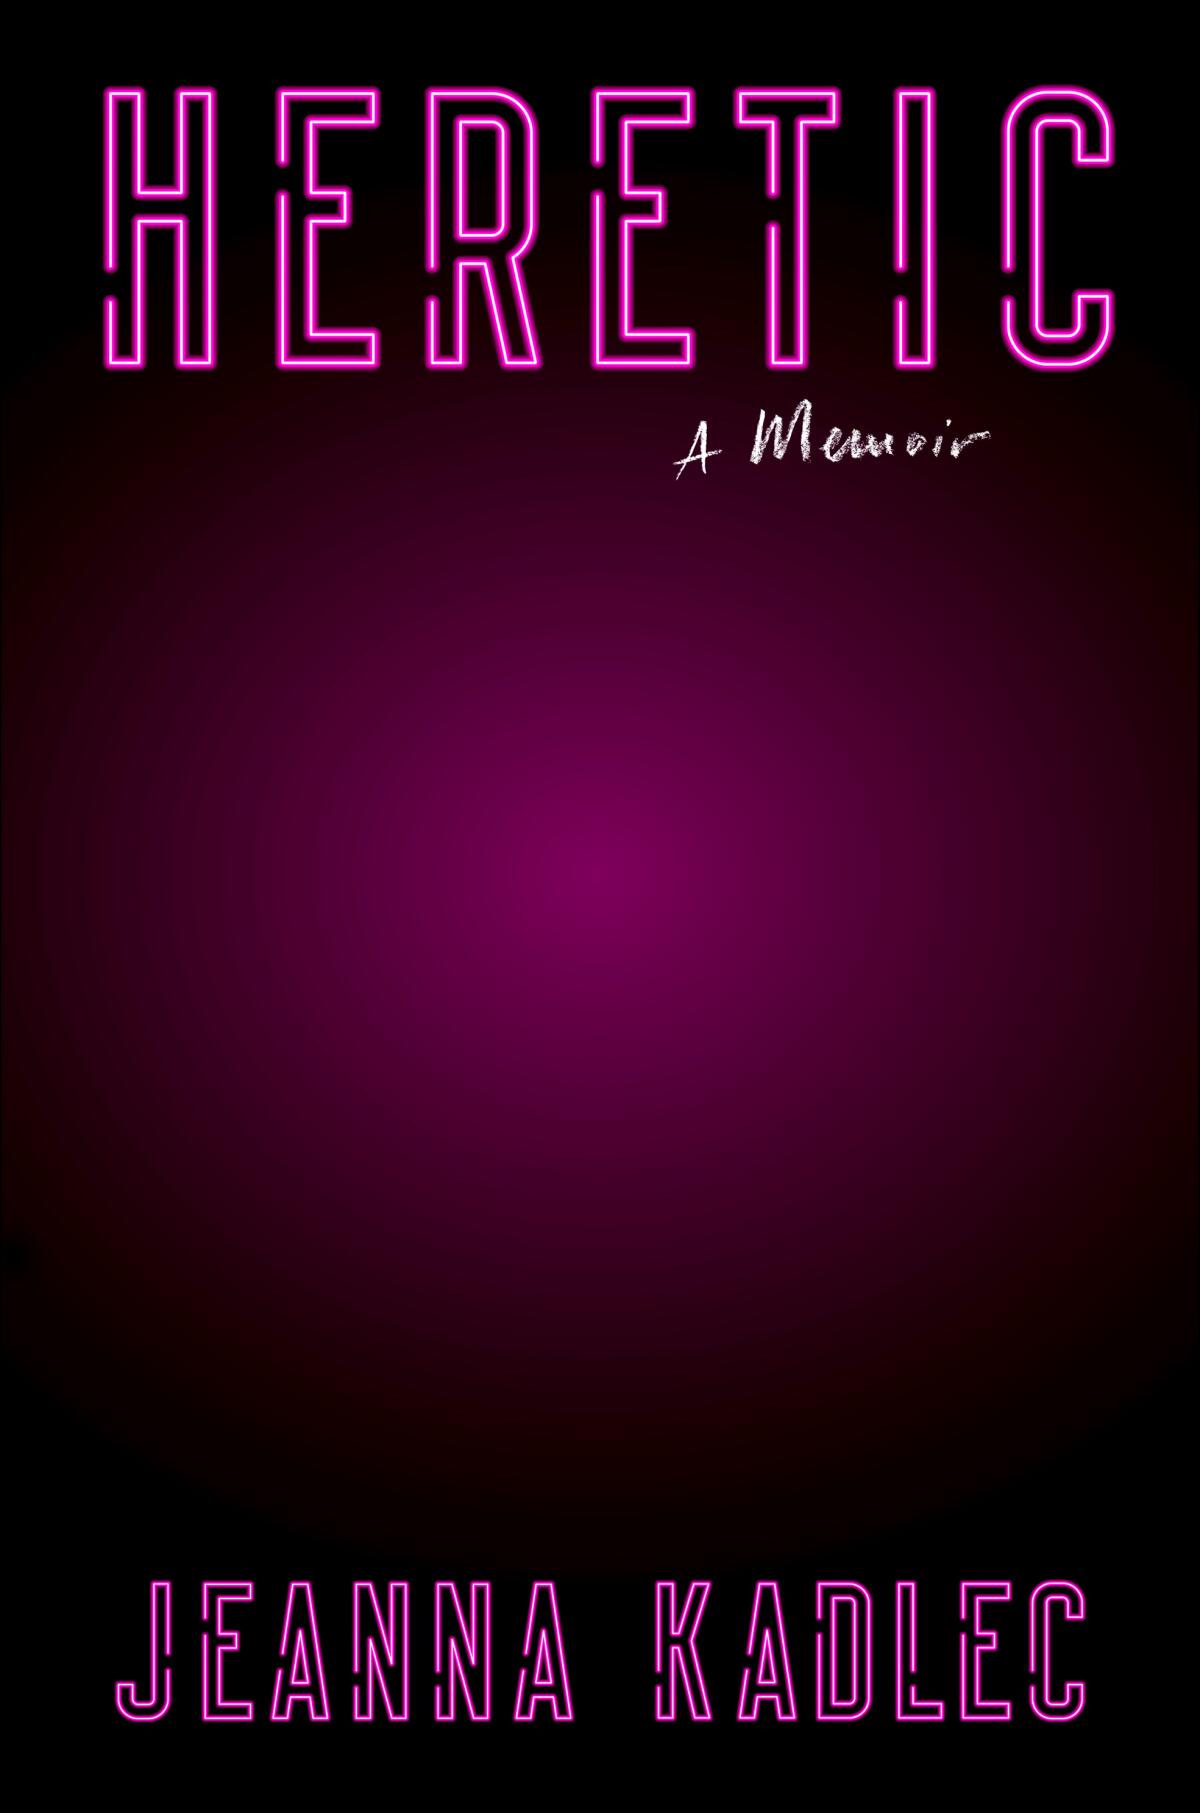 Cover of "Heretic," by Jeanna Kadlec is purple with writing in neon purple 